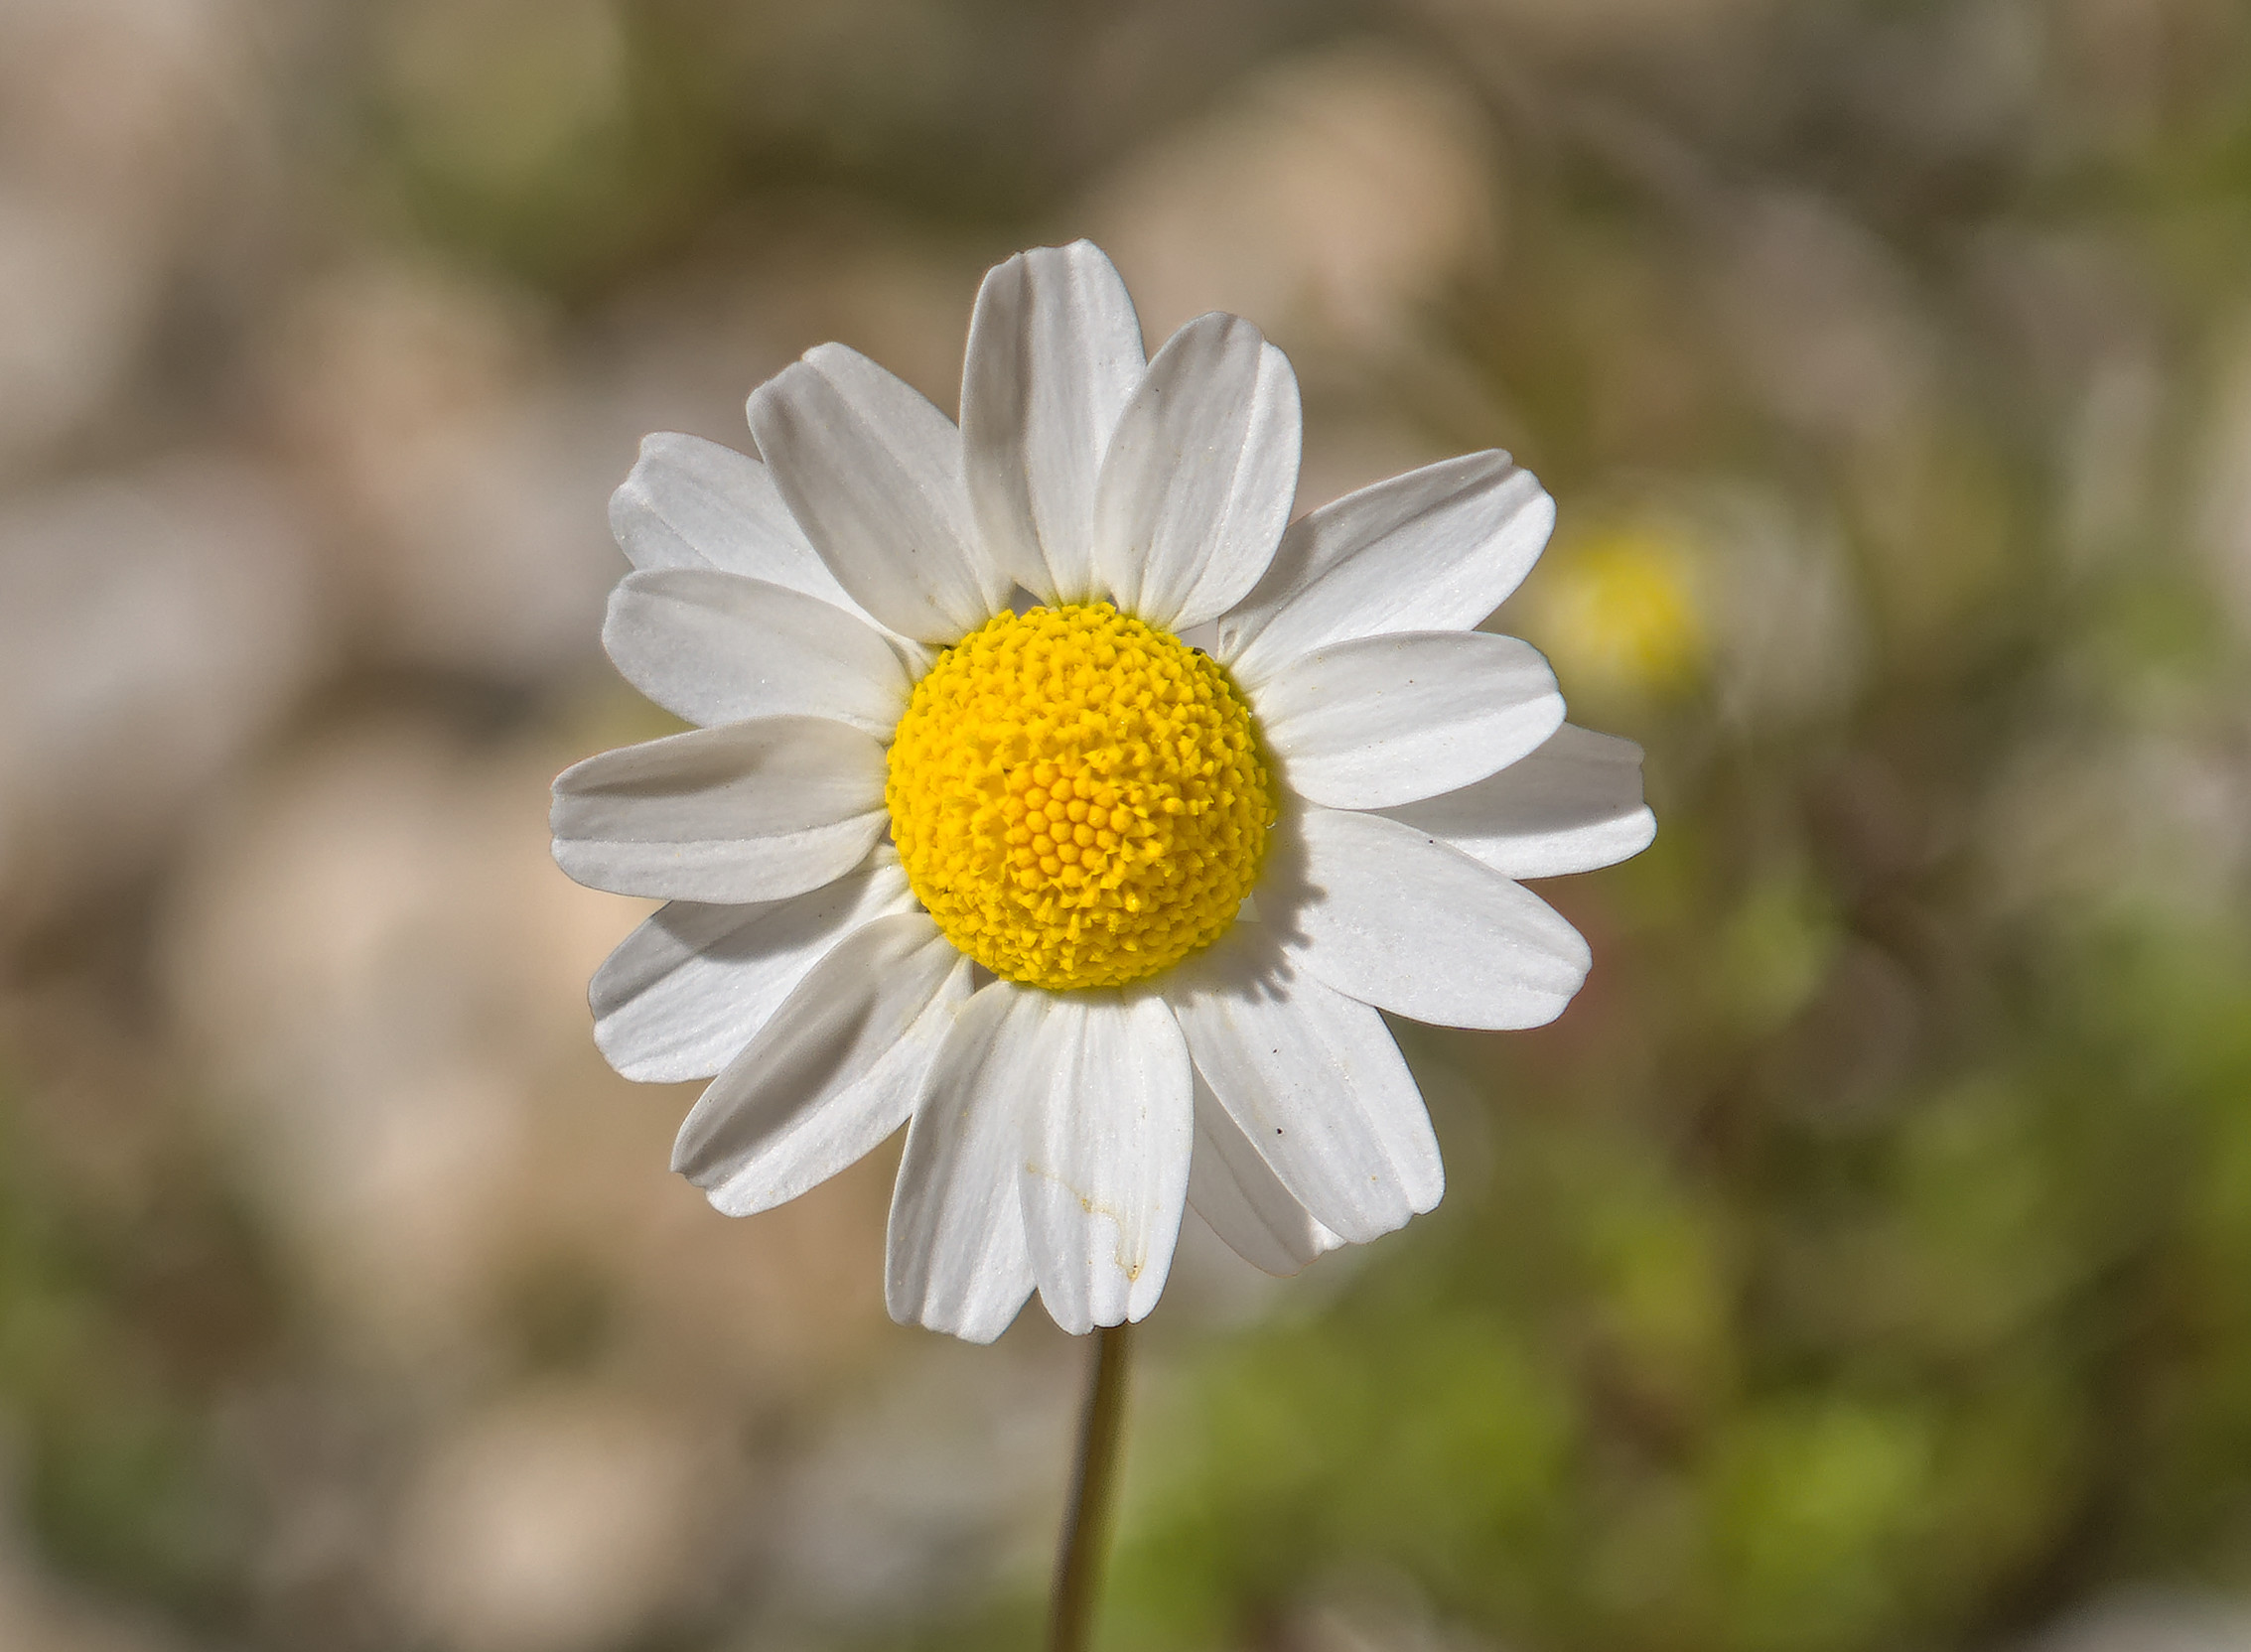 A close up picture of a daisy type flower. A yellow centre with many white petals around the yellow. A blurred out background.